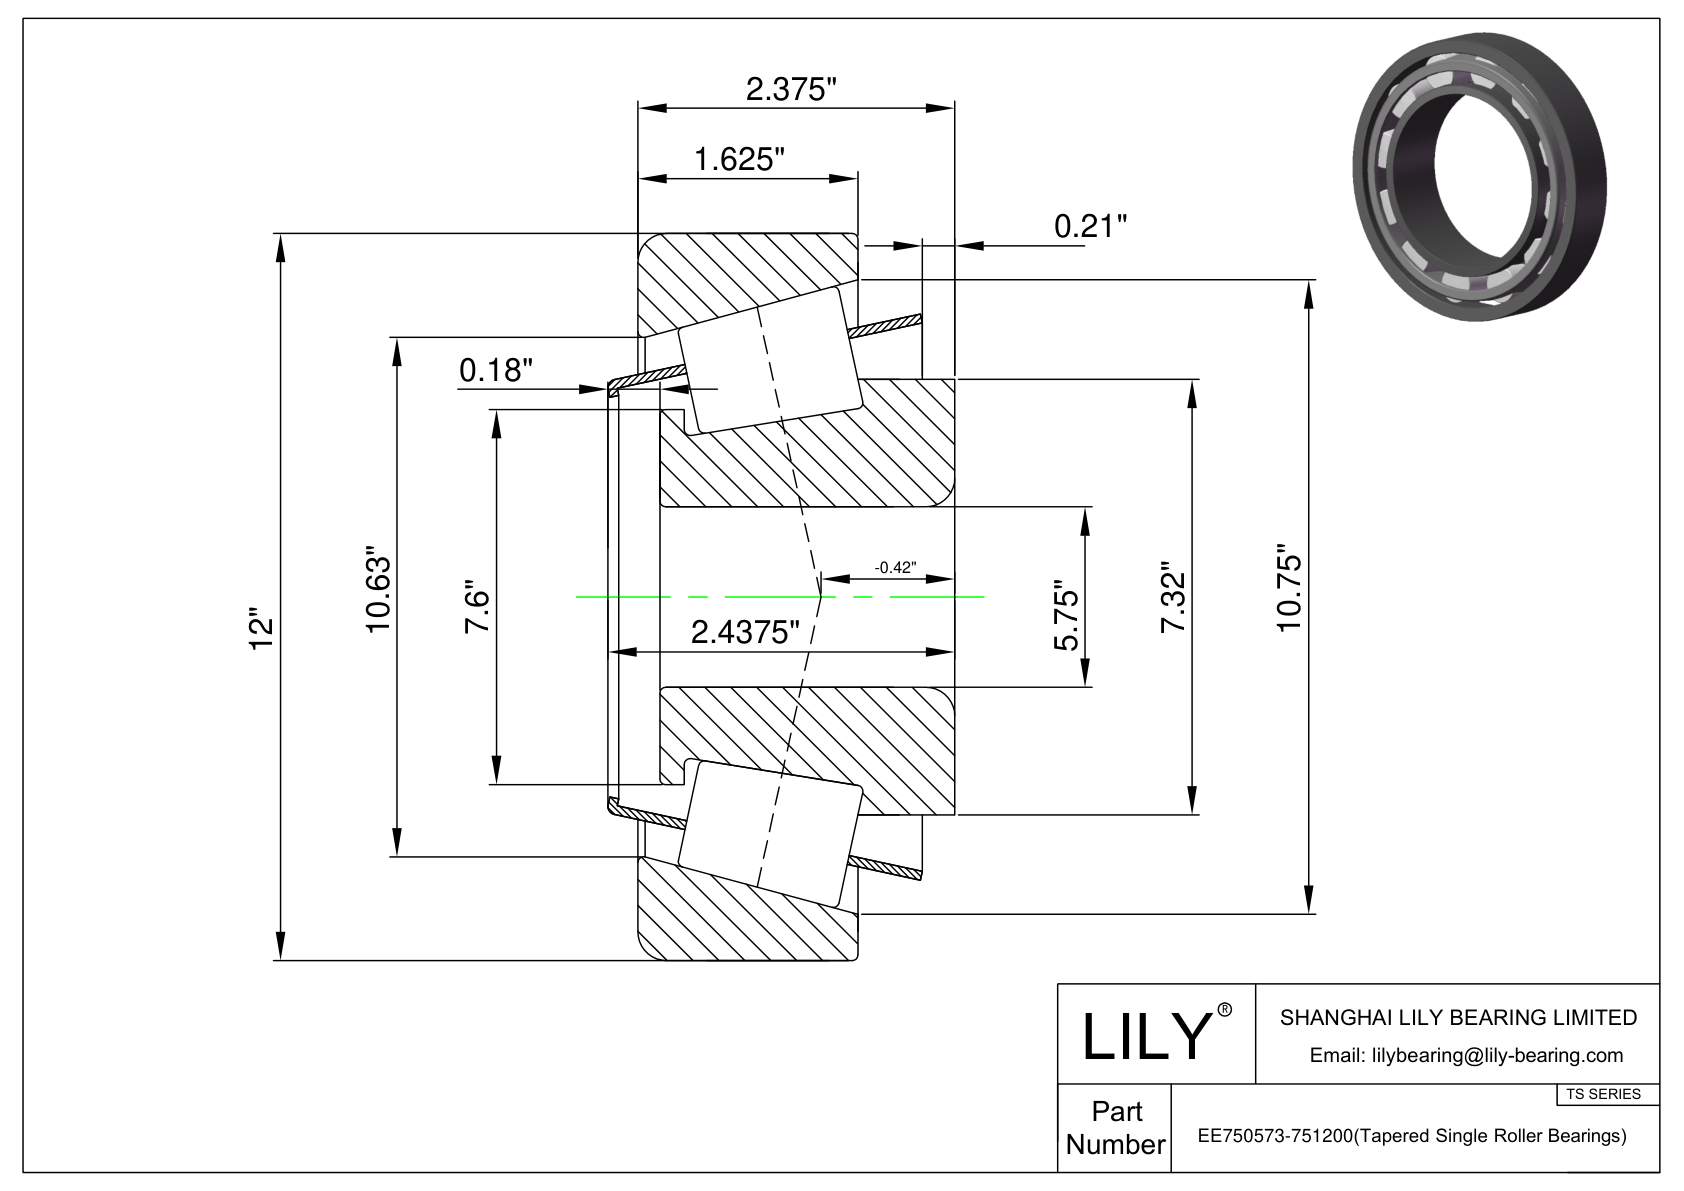 EE750573-751200 TS (Tapered Single Roller Bearings) (Imperial) cad drawing